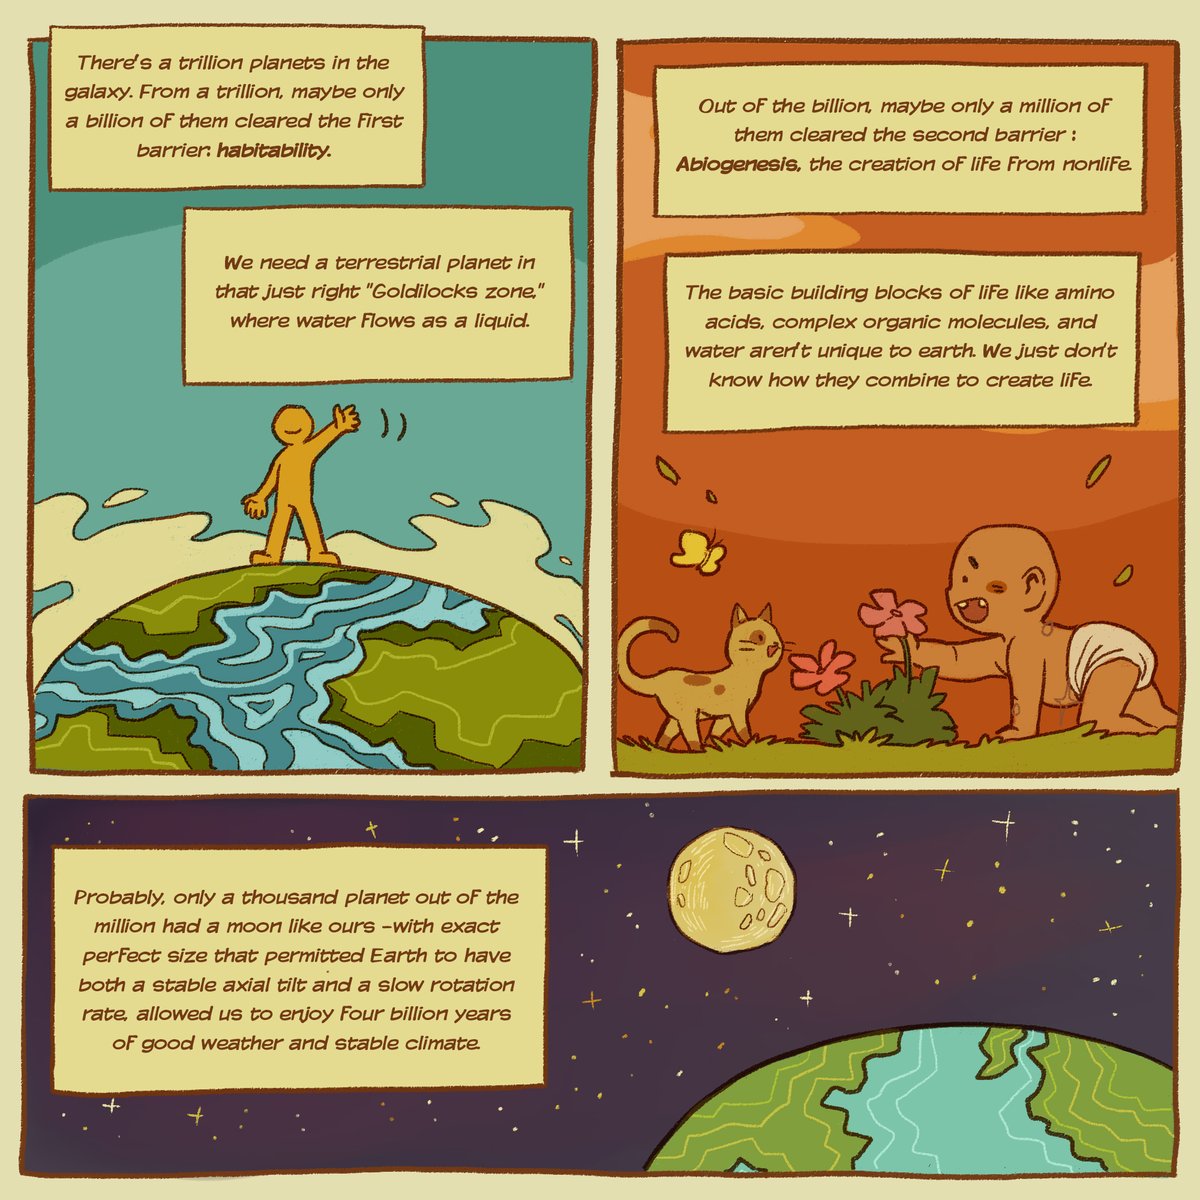 This is an old comic I made but never upload in this Twitter account, so I figured I will publish this for #EarthDay2020 :)

Inspired by Stephen Webb's TED Talk about the Great Filter, I tried to visualize the humanity perspective out of it (1/3) 